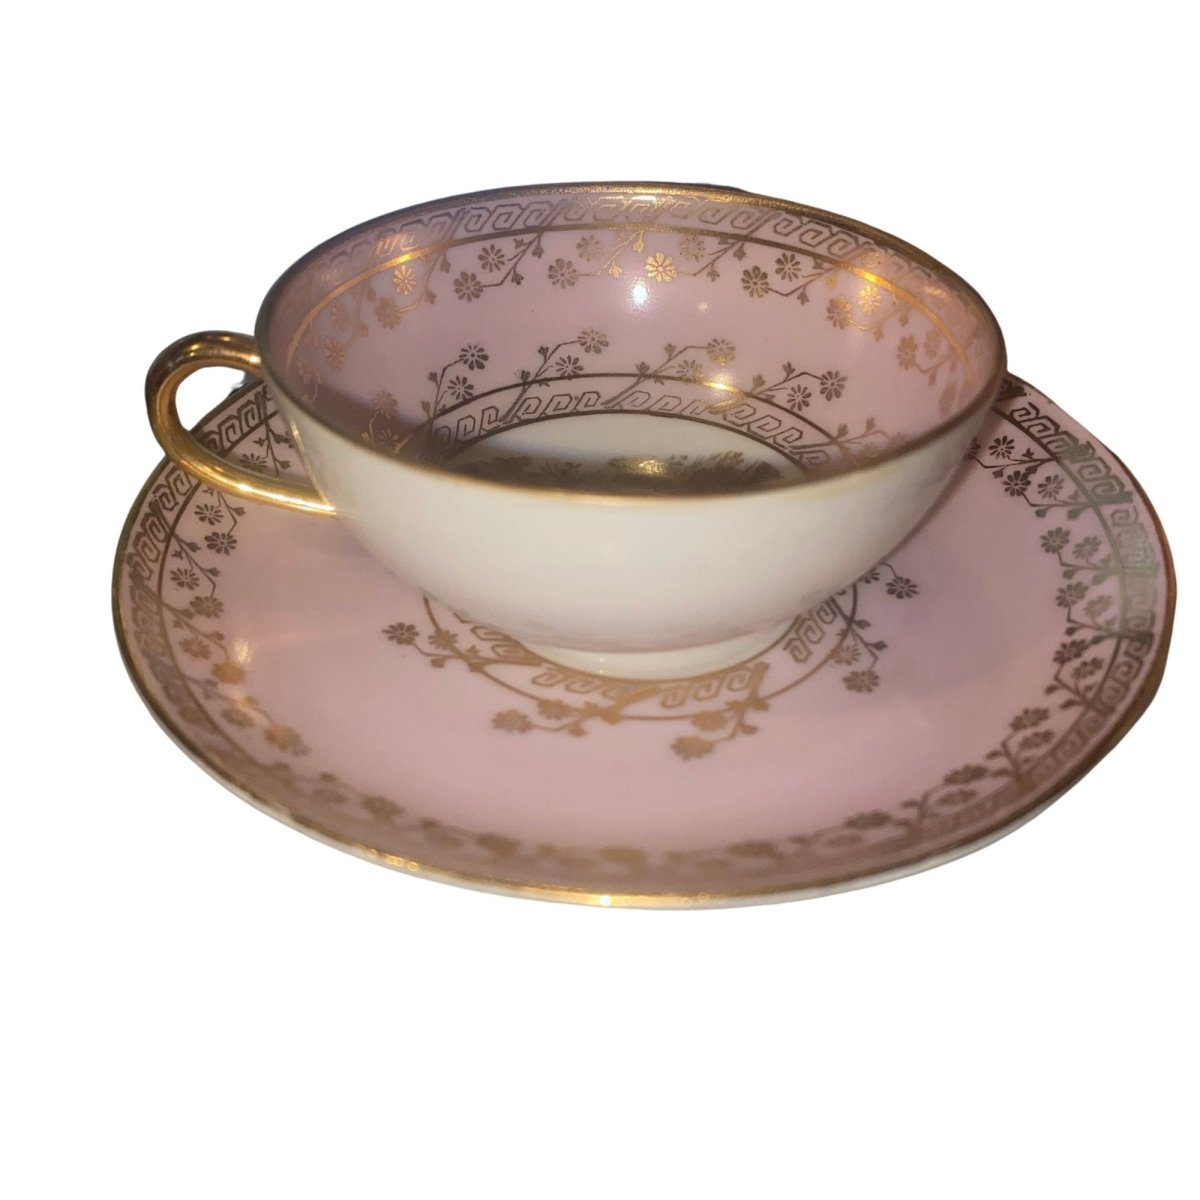 Delightful Pink & Gold Fragonard Mocha Cup, Smooth White Exterior with Gilded Handle - Chinamania.shop